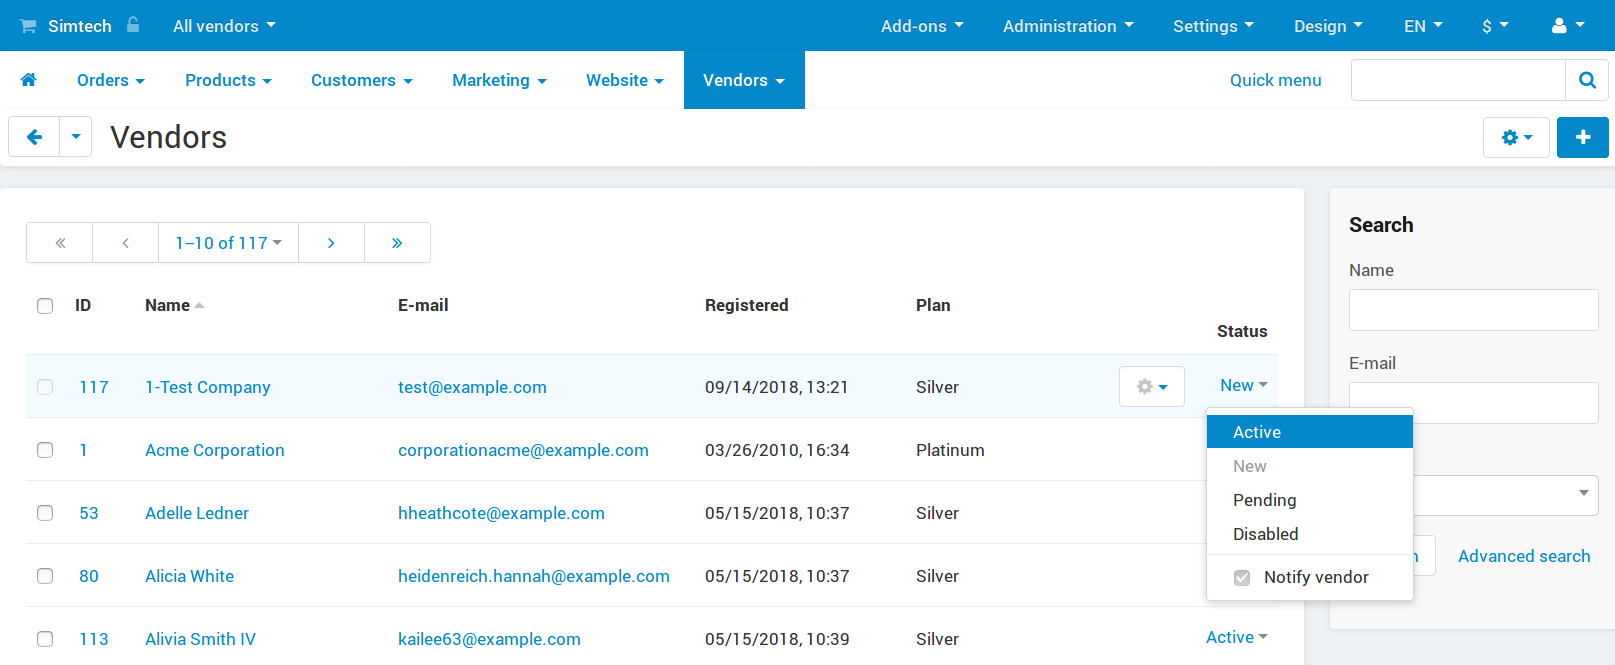 Find the vendor account you want to activate and change its status to Pending or Active.